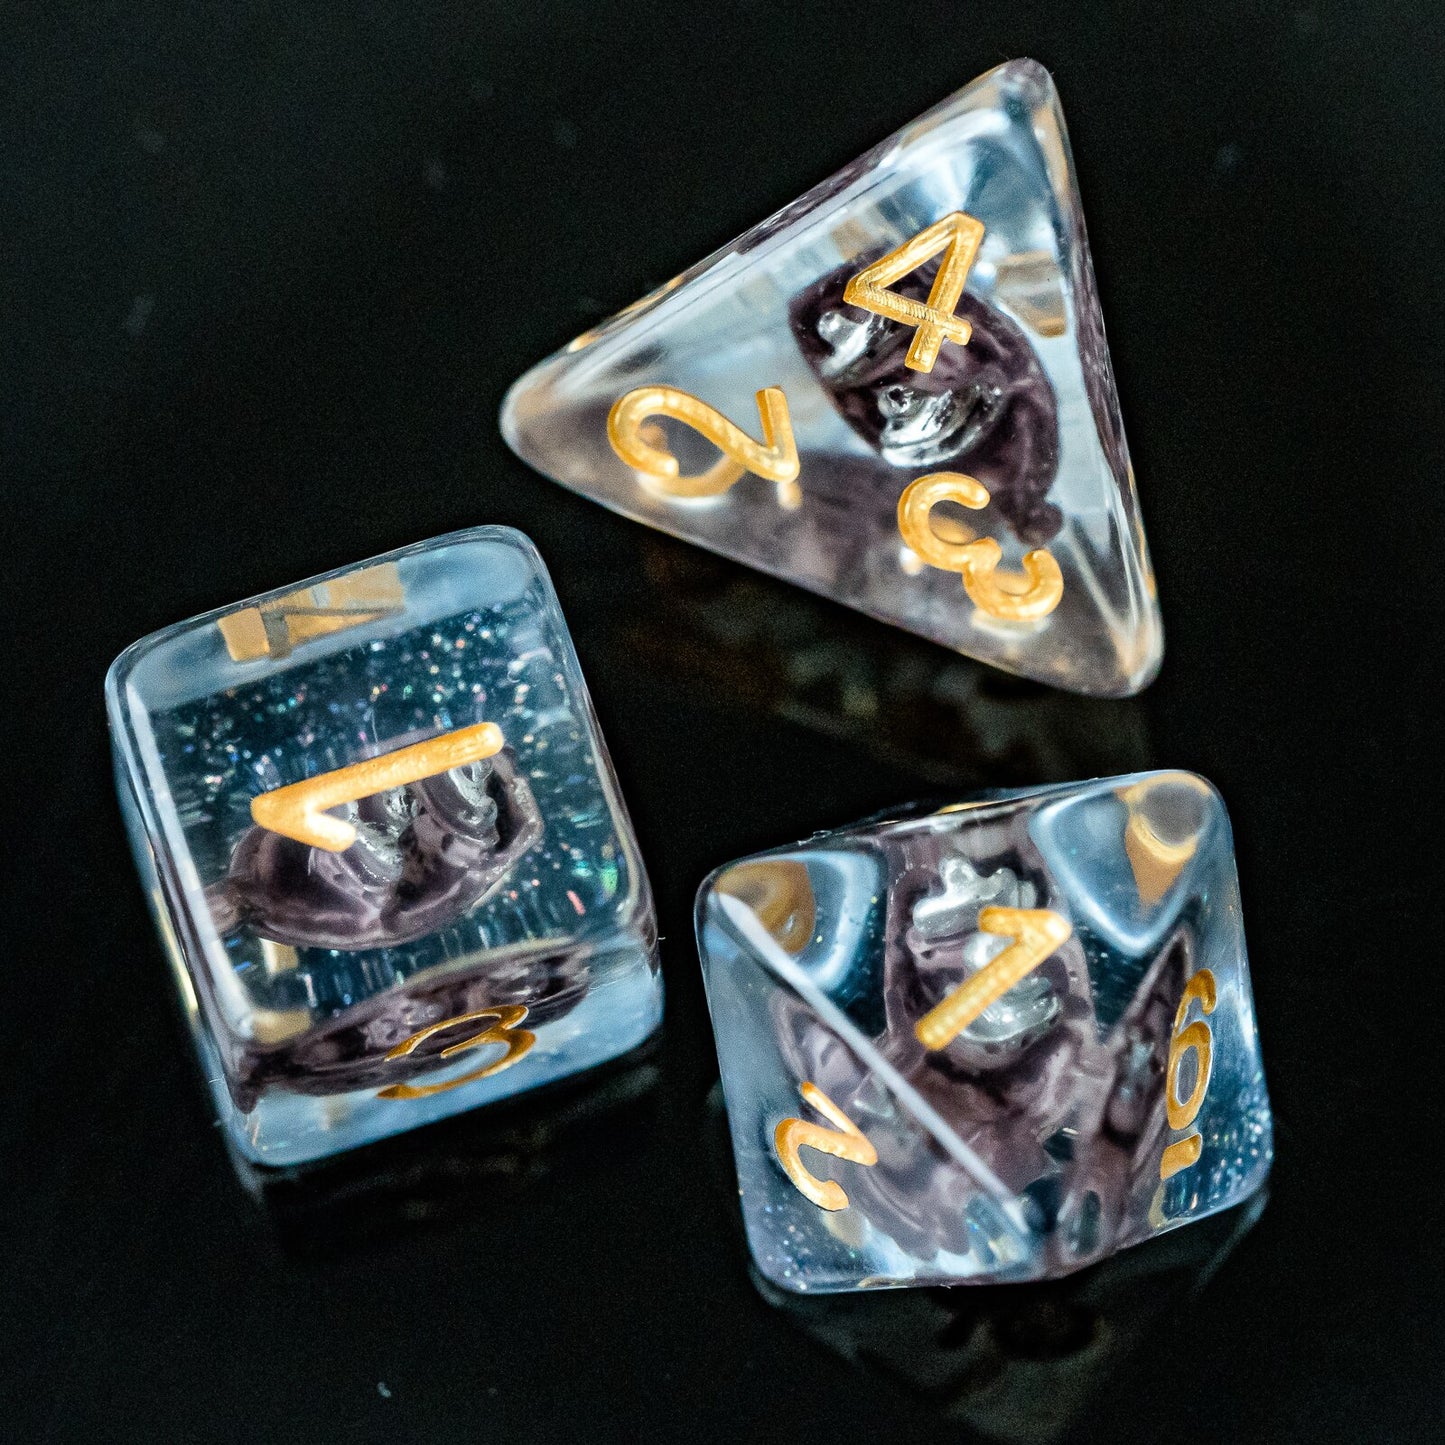 transparent sail boat dice set, yellow numbers on blue/clear resin